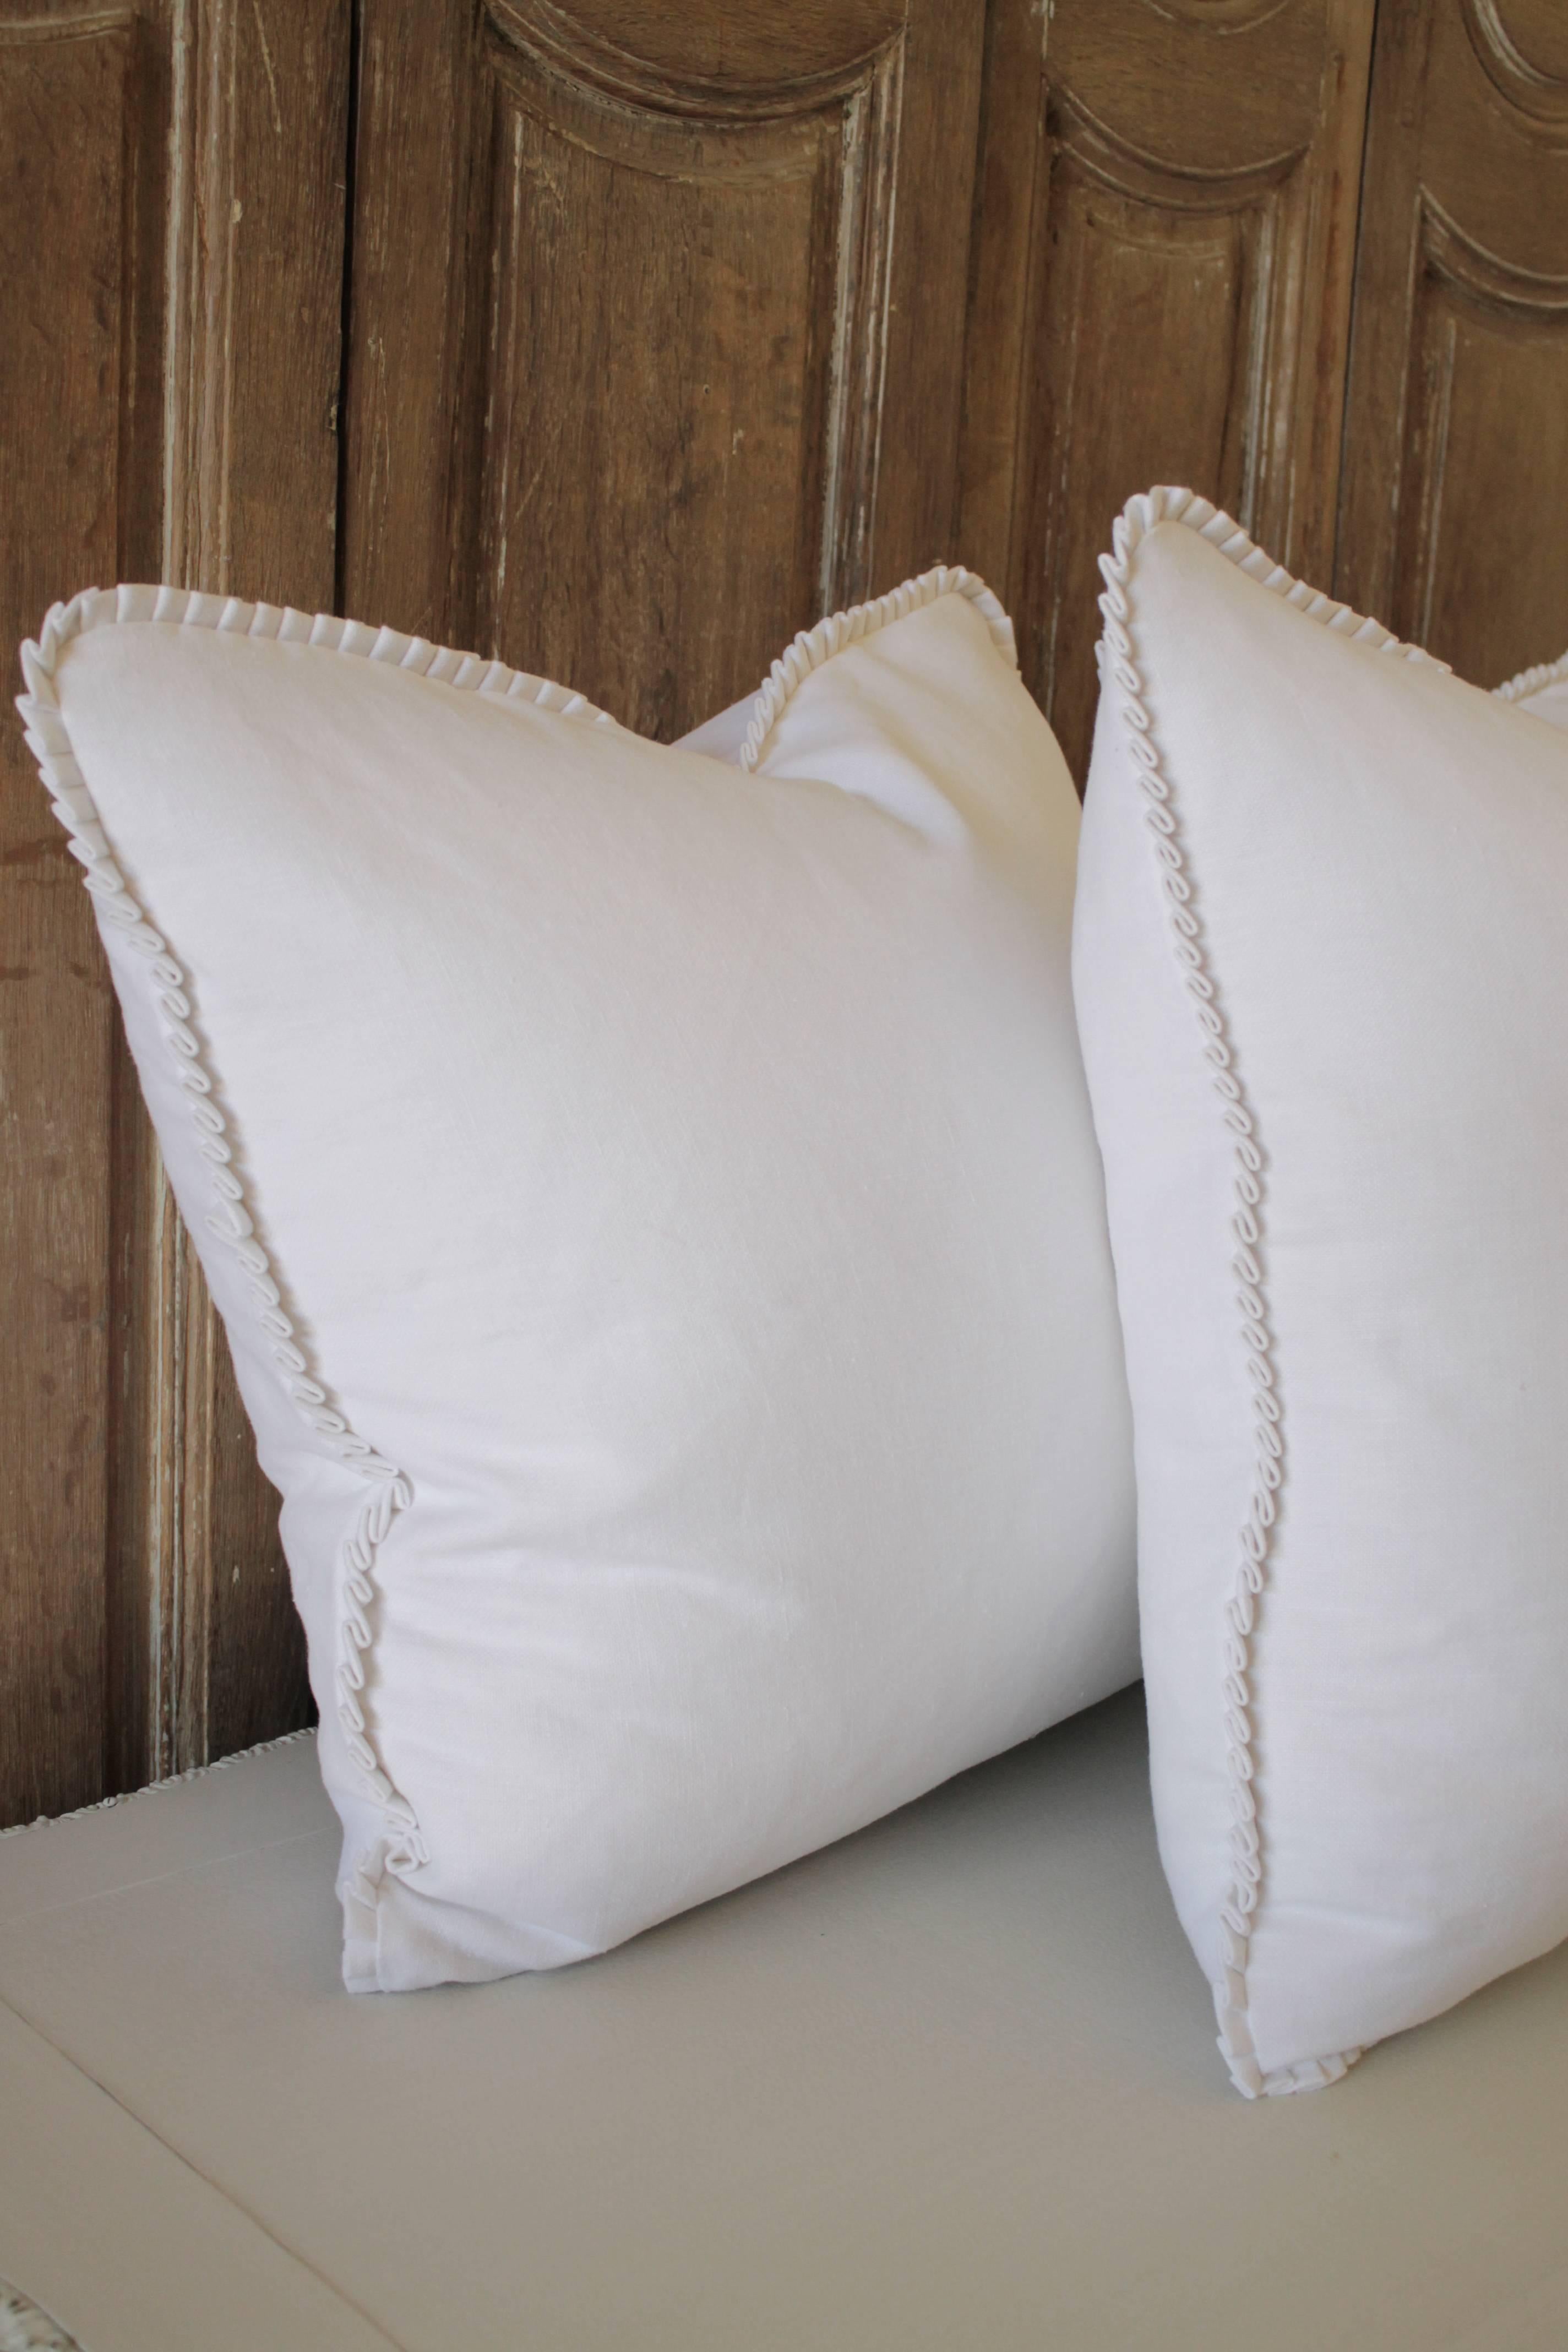 American Custom-Made Luxury Linen Pillows with Ruffle